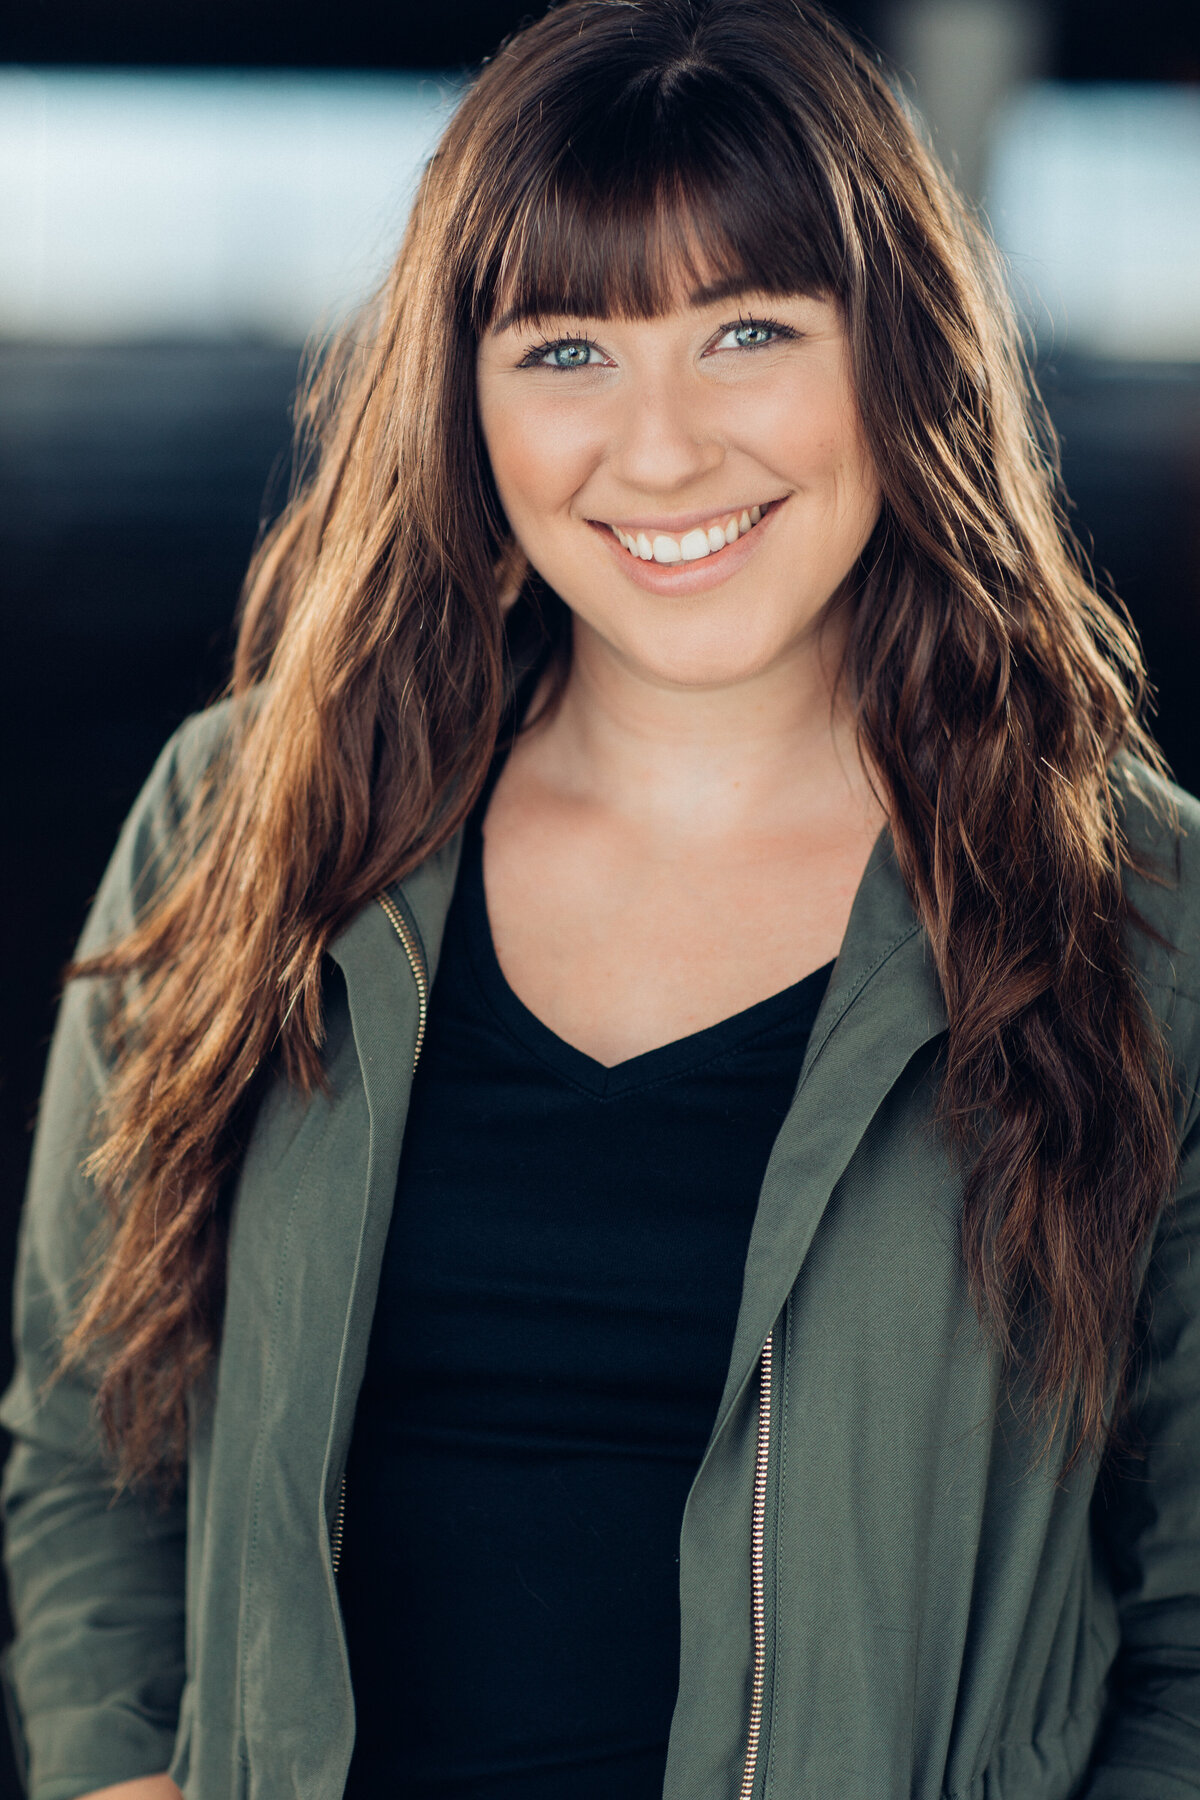 Headshot Photograph Of Young Woman In Outer Gray Jacket And Inner Black V-Neck Shirt Los Angeles